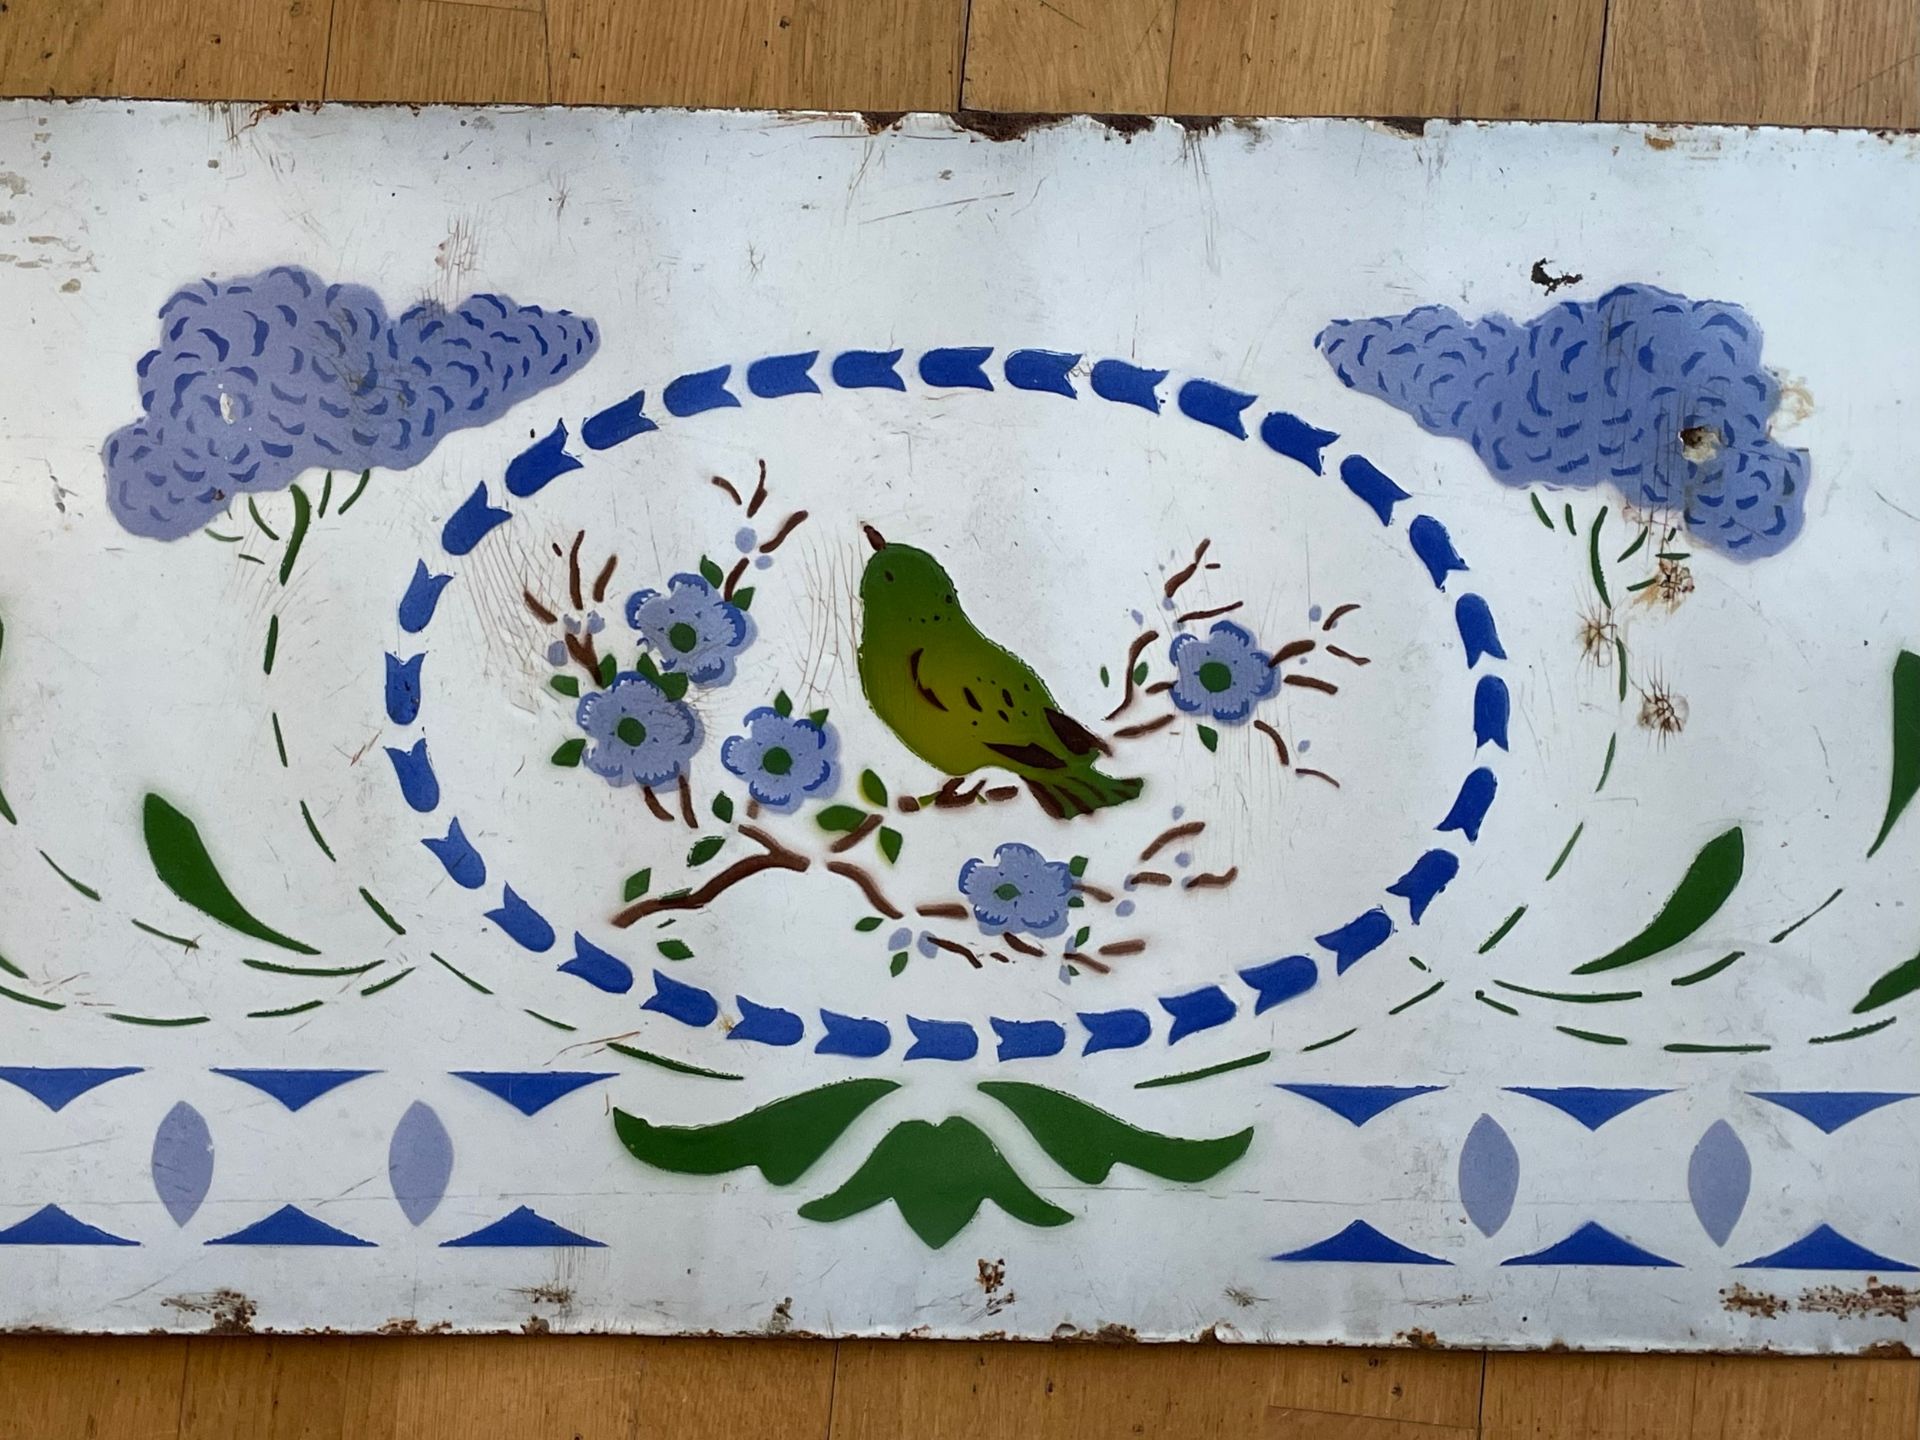 An early 20th century vitreous enamelled panel, depicting a bird amongst foliage. 122x38cm. - Image 4 of 5